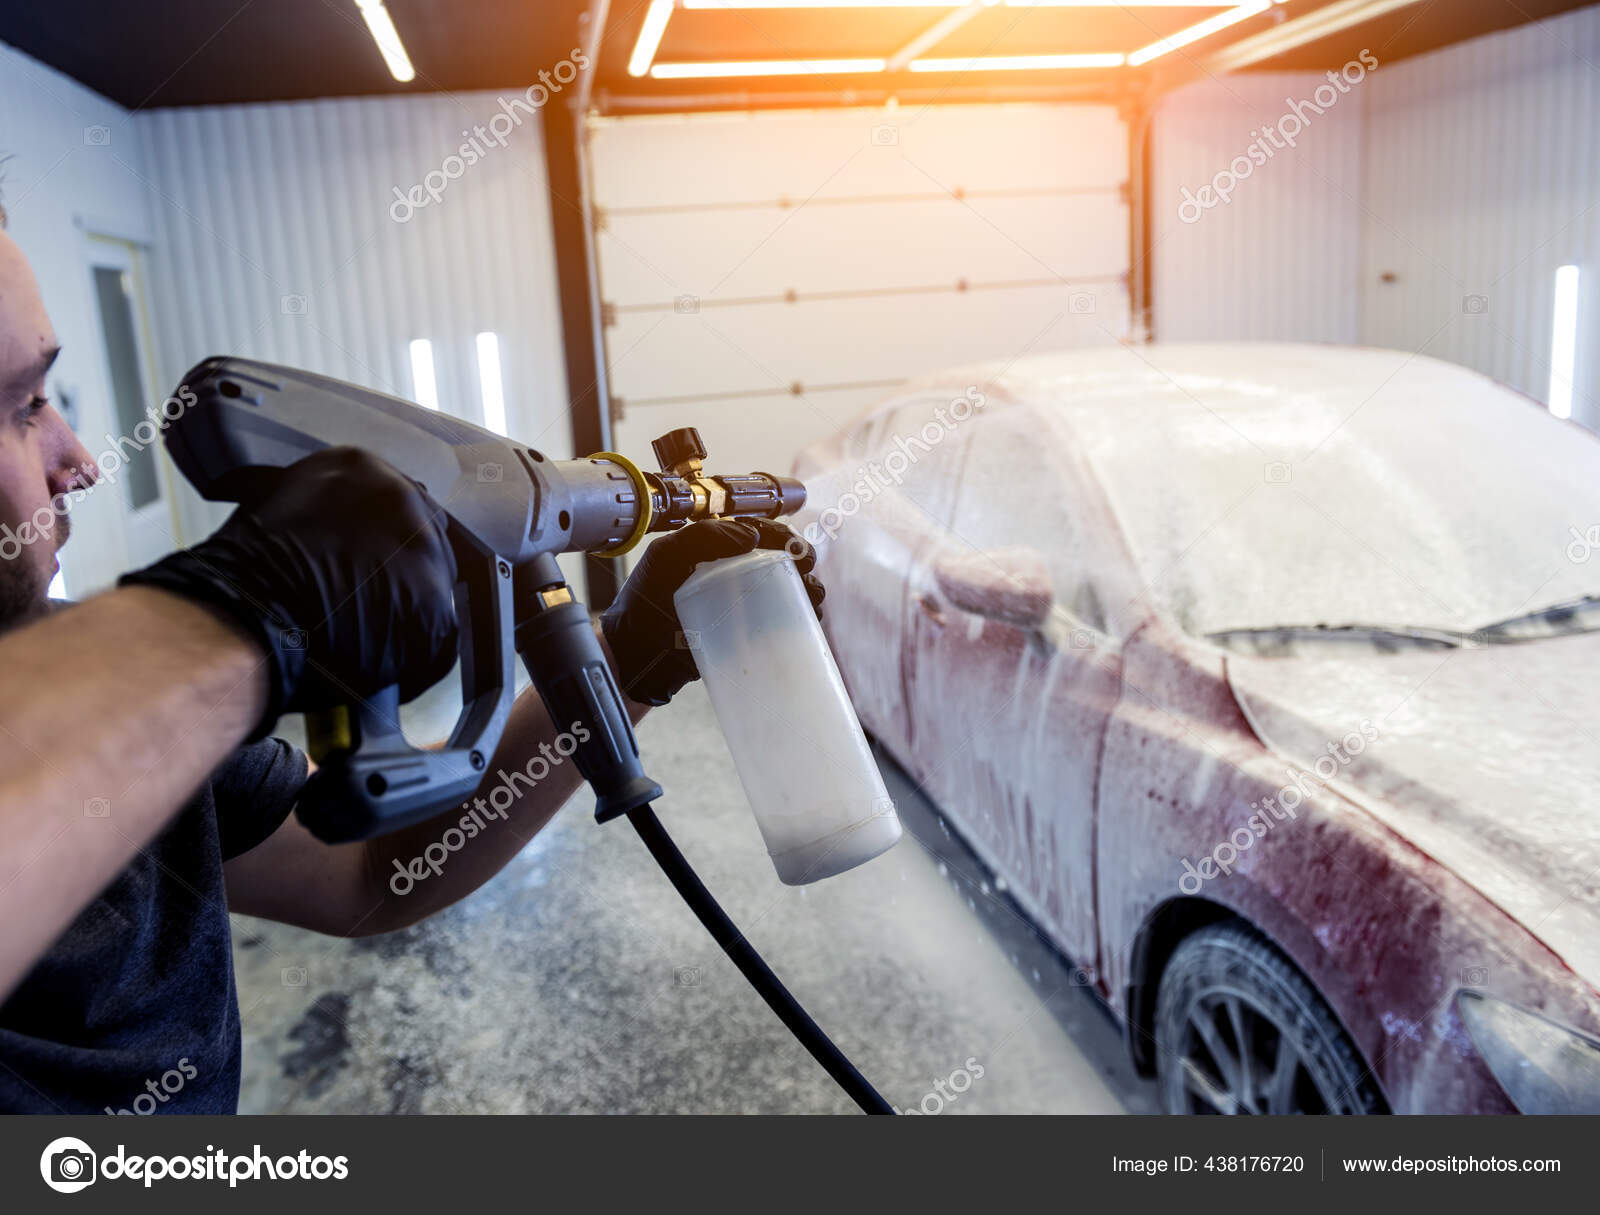 Premium Photo  Worker washing car with active foam on a car wash.